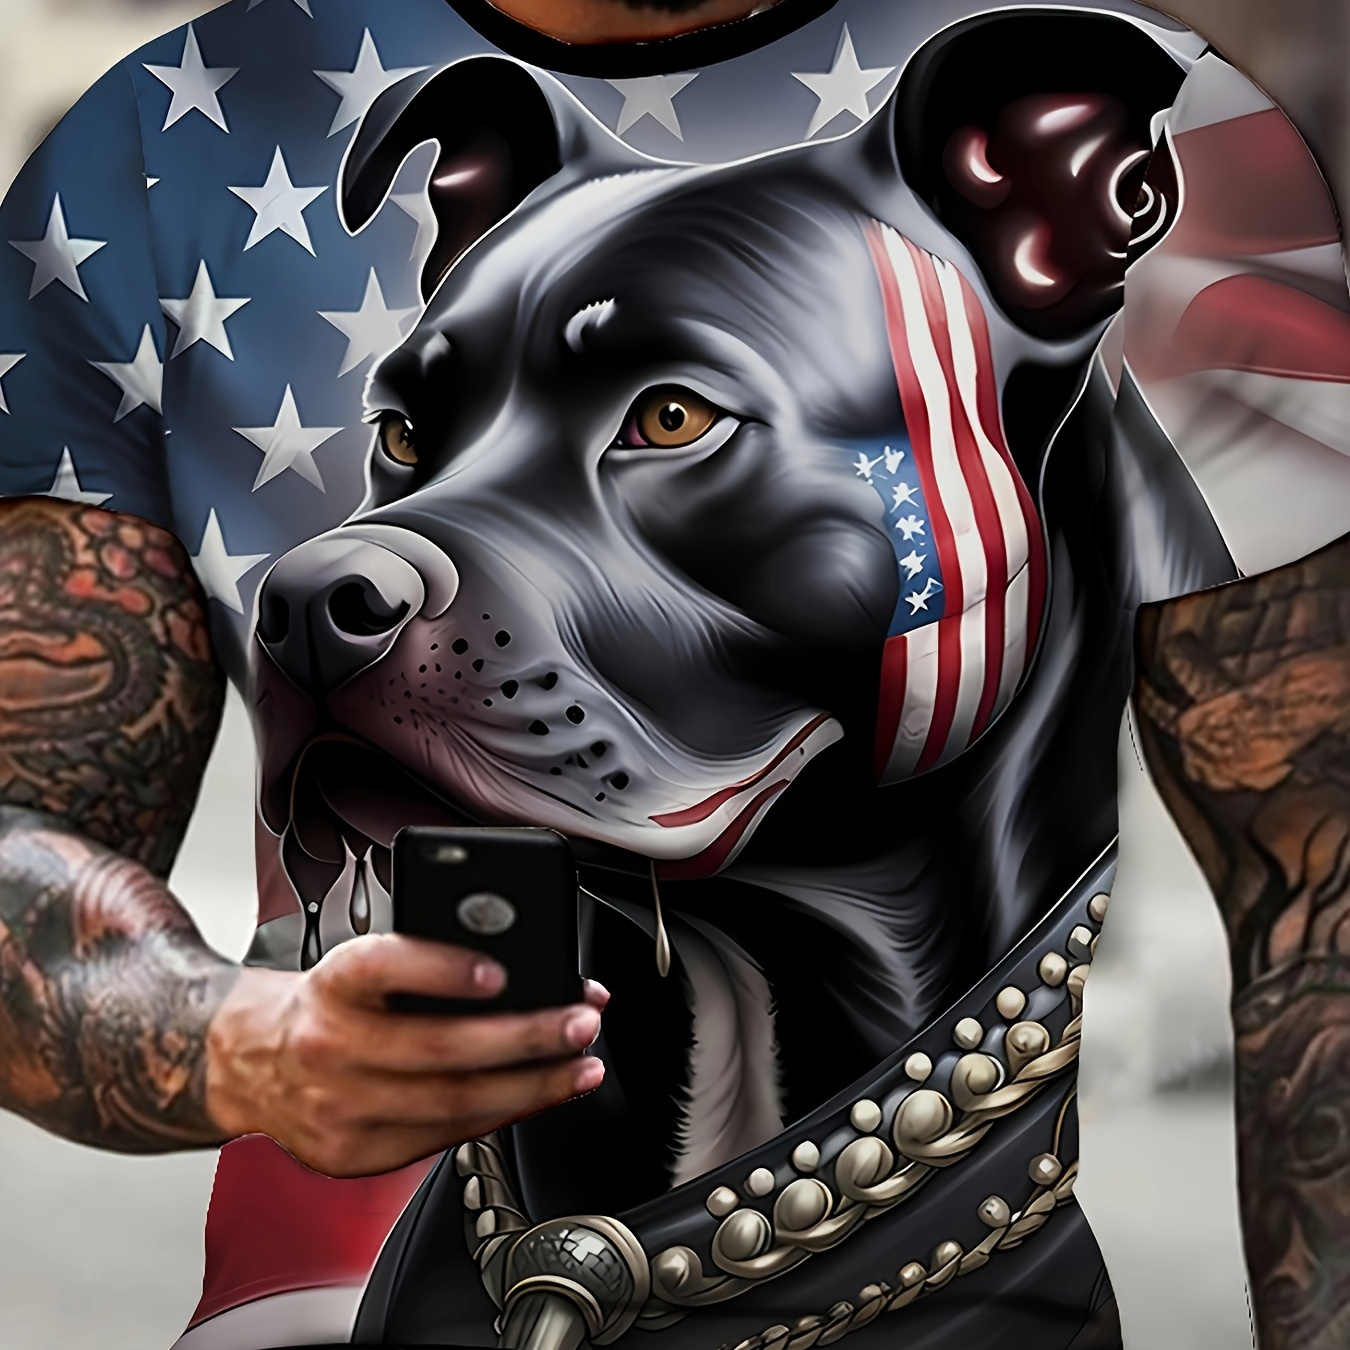 

3d Pattern Dog & Flag Print Plus Size Men's Short Sleeve T-shirt, Casual Fashion Crew Neck Tee, All Over Graphic Top For Outdoor Sport And Leisure, Big & Tall Guys